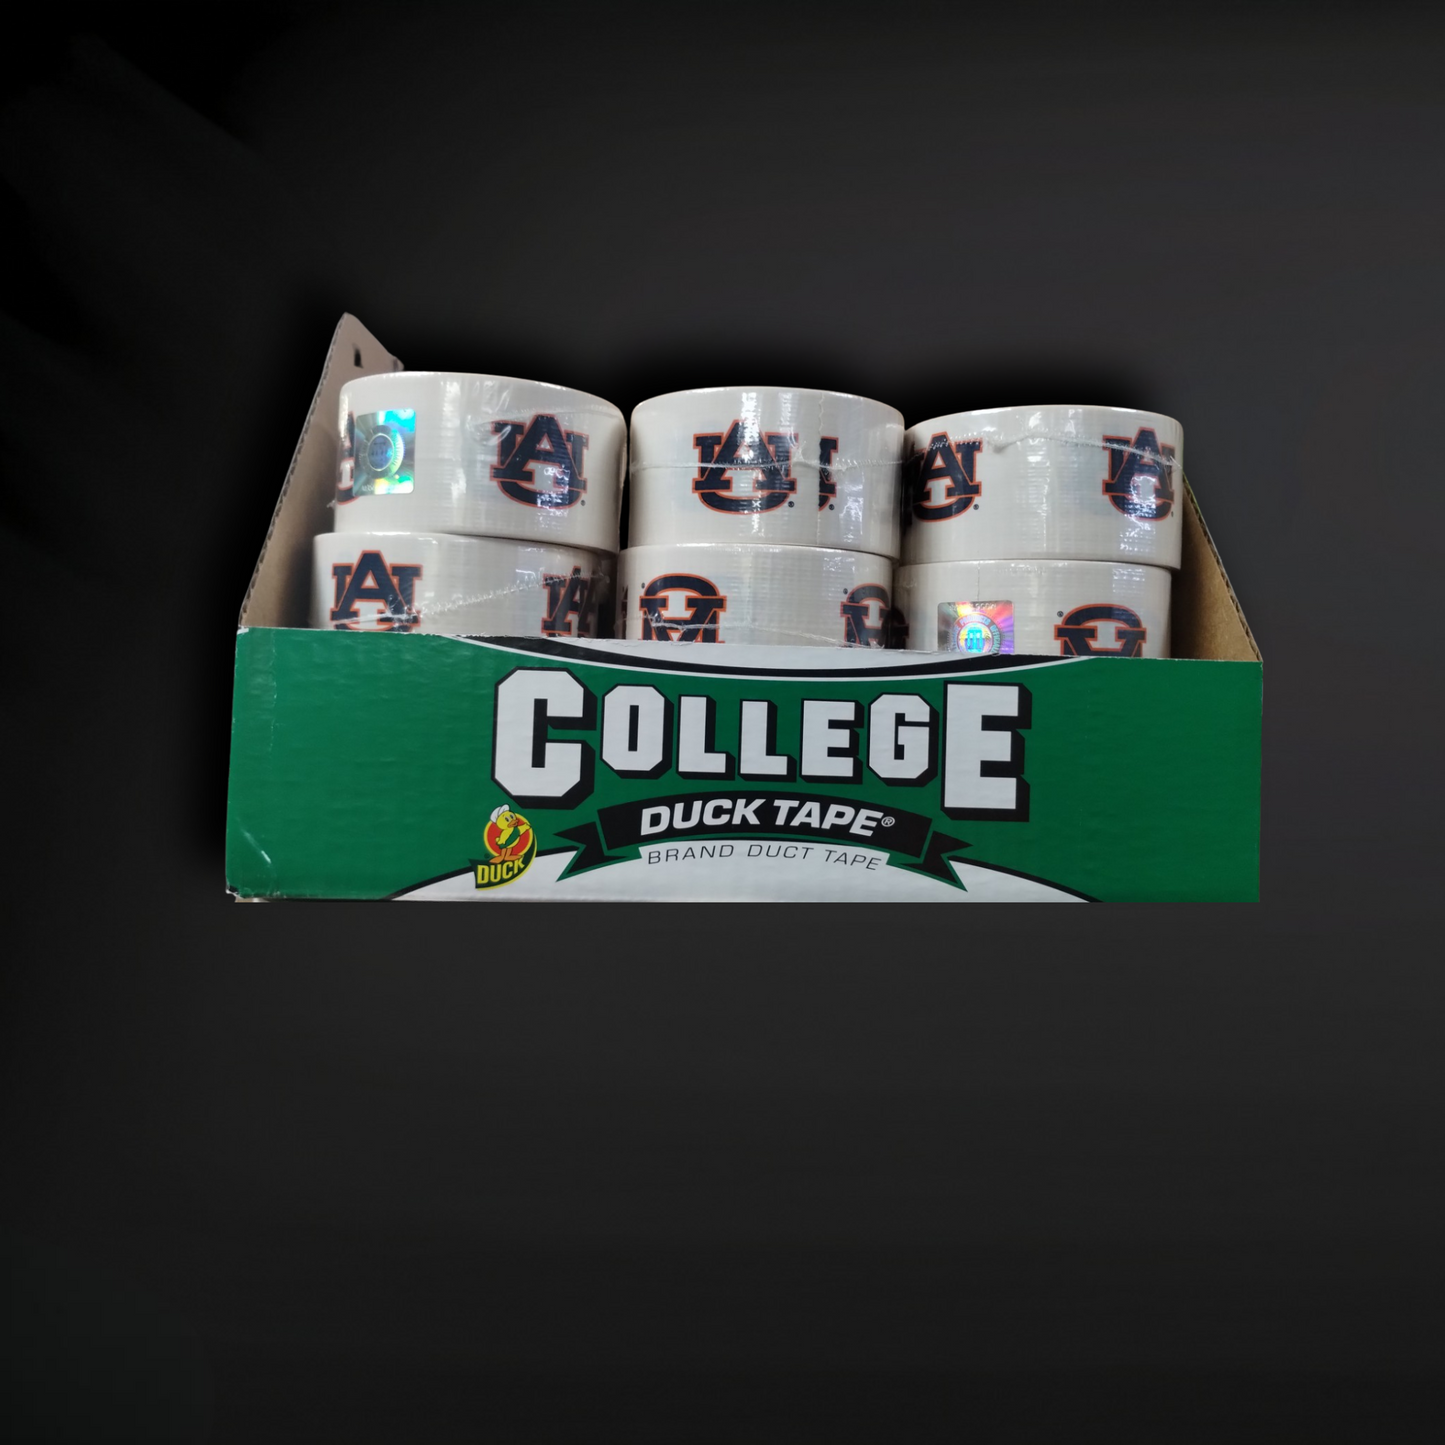 College Duct Tape - Zack Wholesale